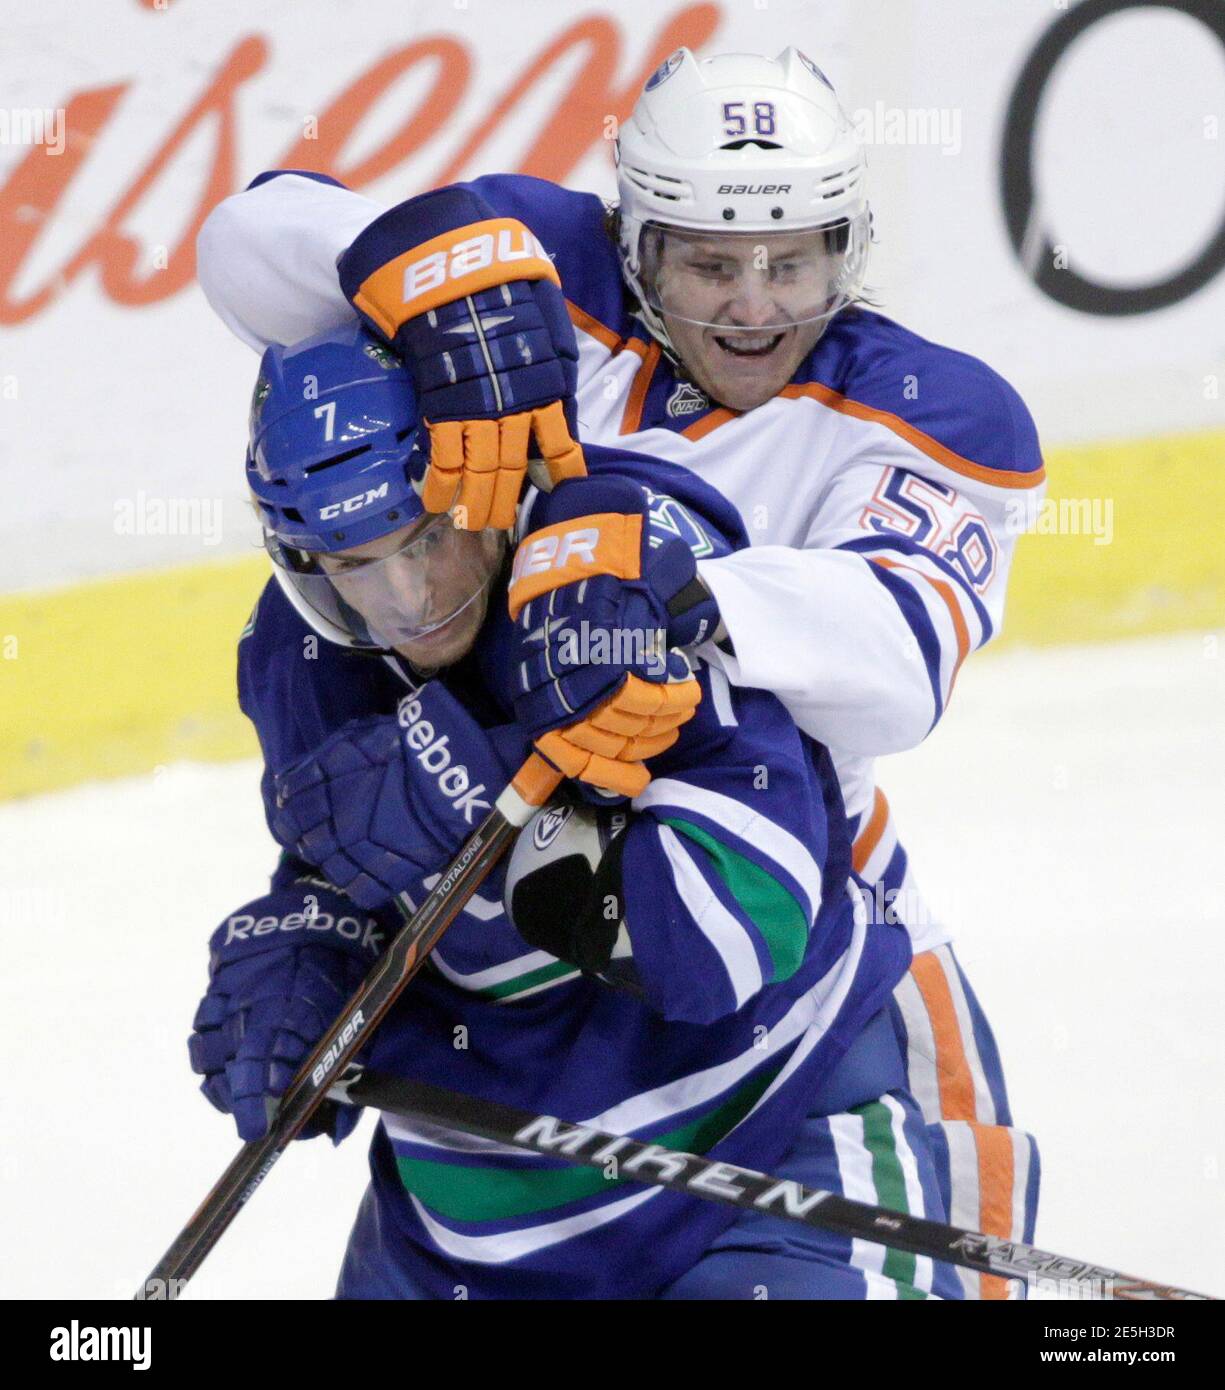 Vancouver Canucks' David Booth (front) is roughed up by Edmonton Oilers' Jeff Petry during the third period of their NHL hockey game in Vancouver, British Columbia April 7, 2012. REUTERS/Ben Nelms (CANADA - Tags: SPORT ICE HOCKEY) Stock Photo